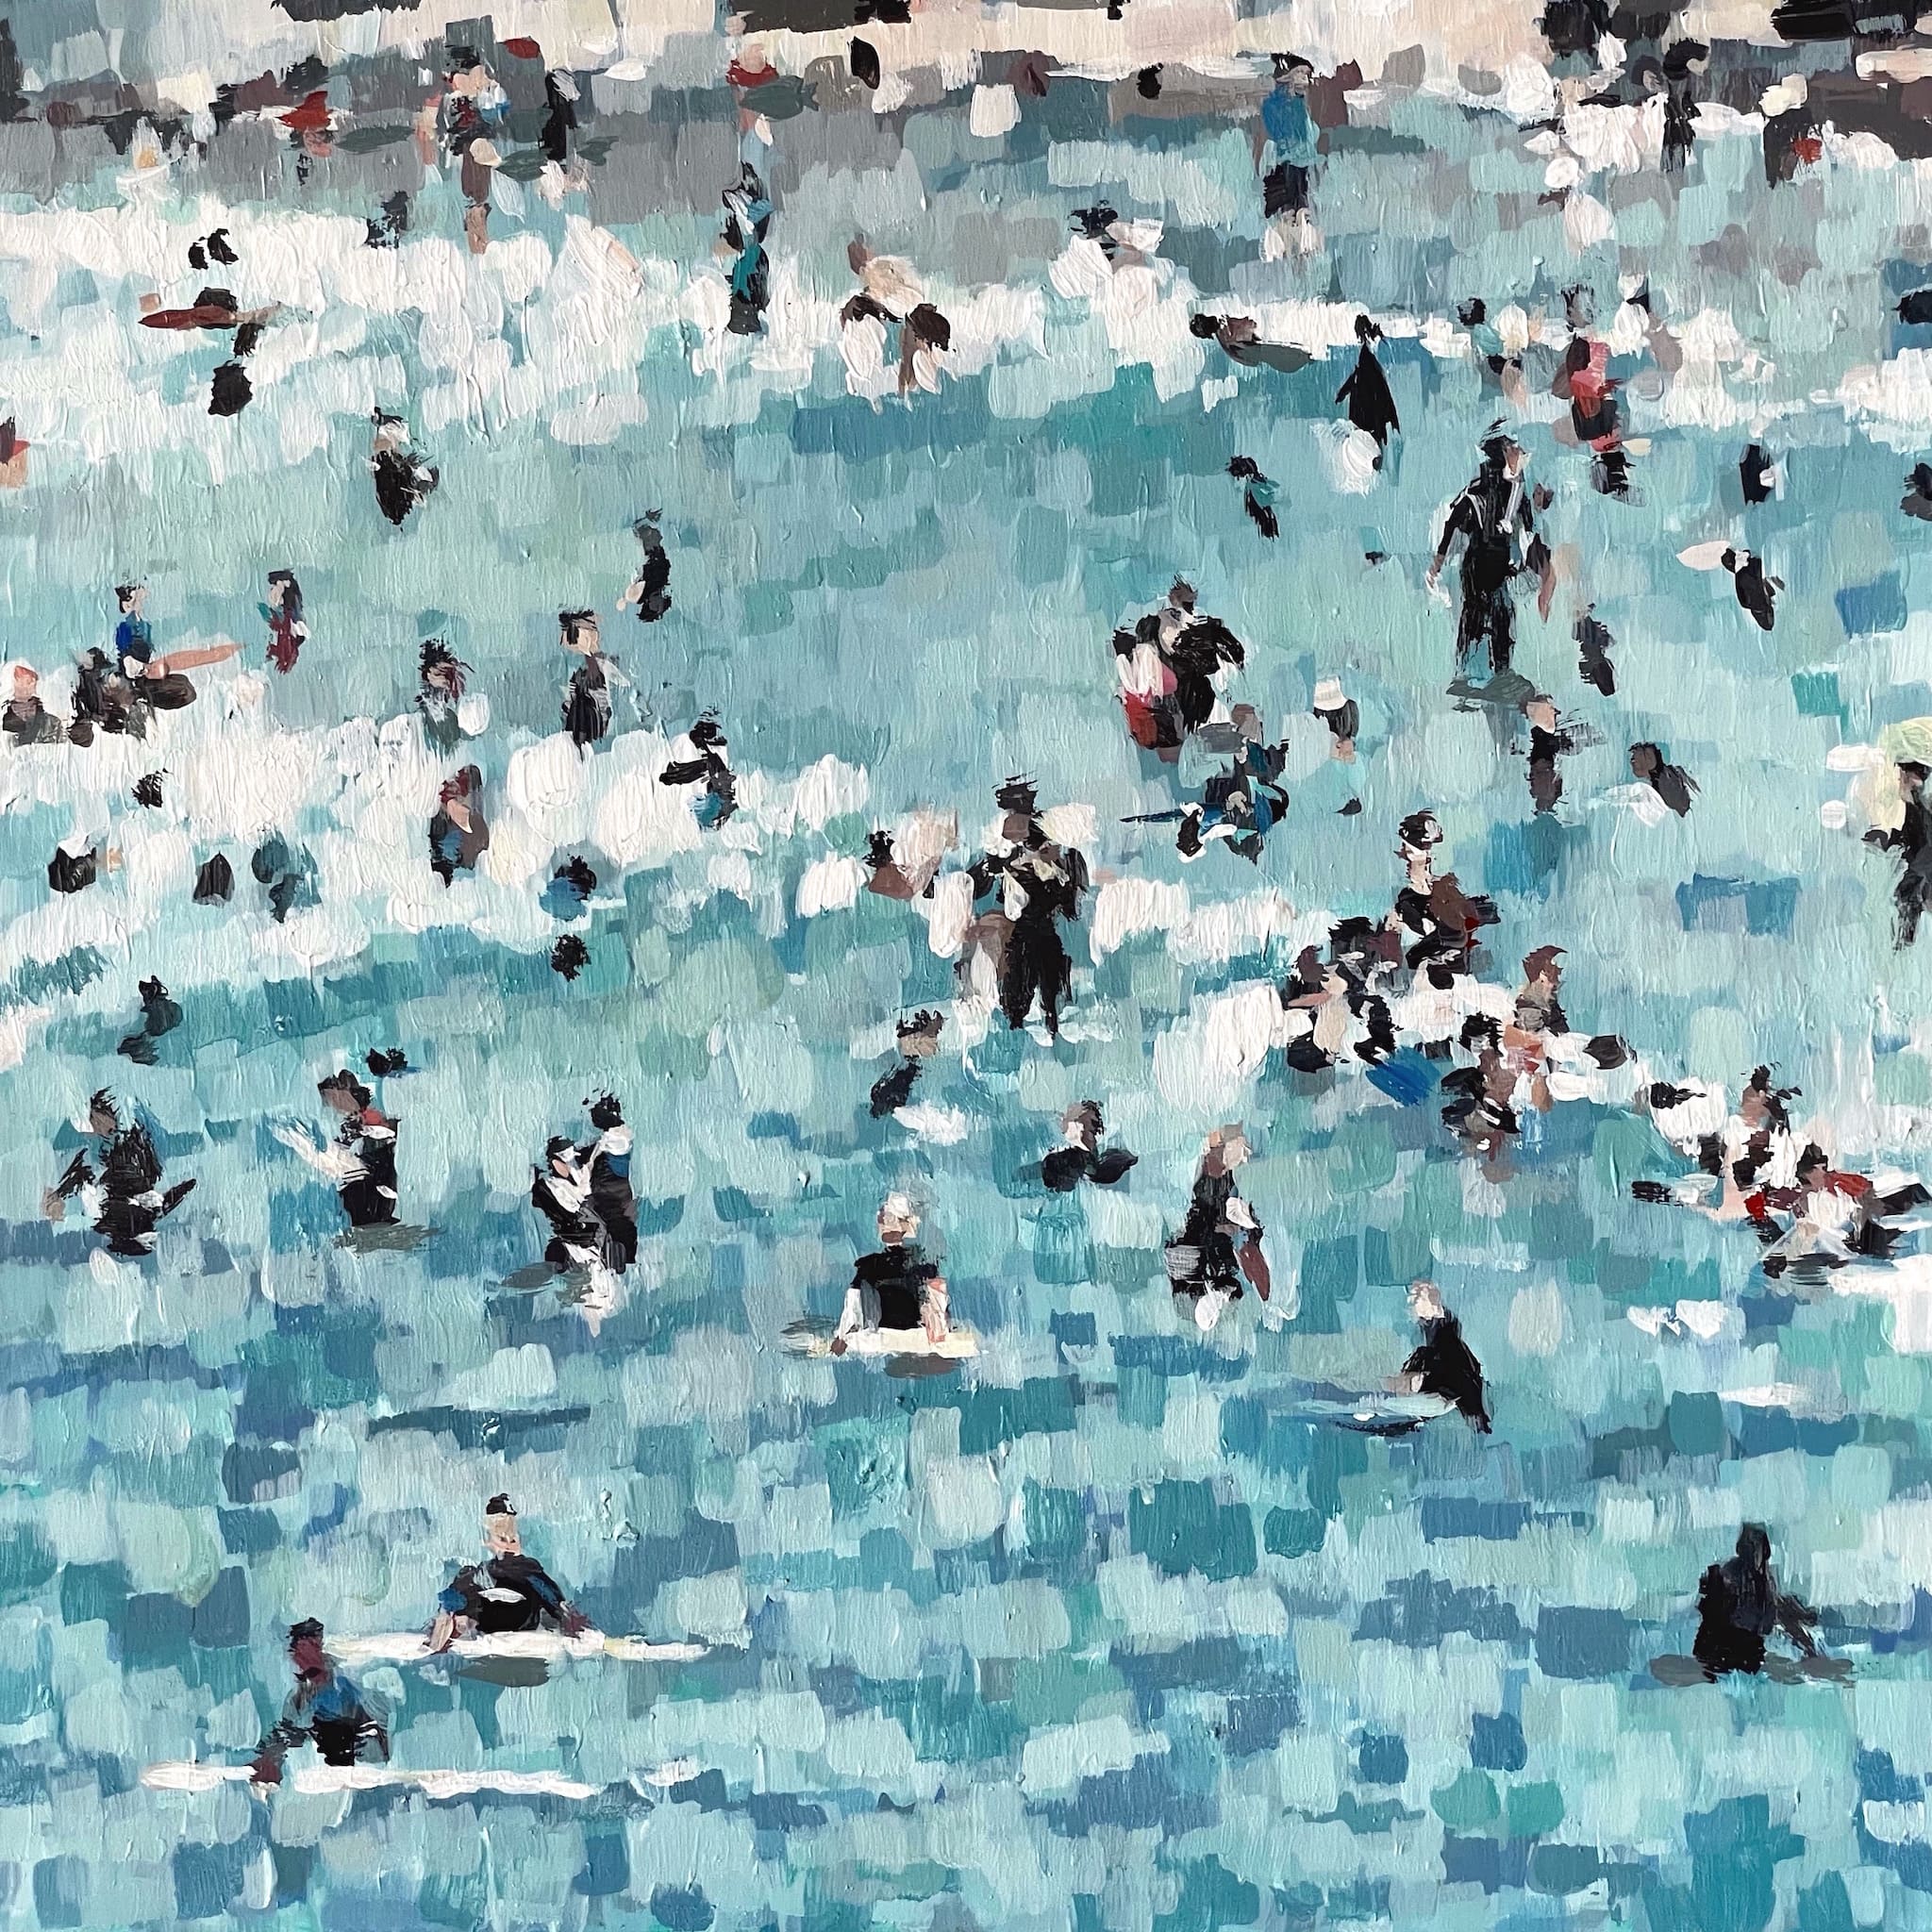 Semi abstract painting of a crowded beach by artist Zoe James